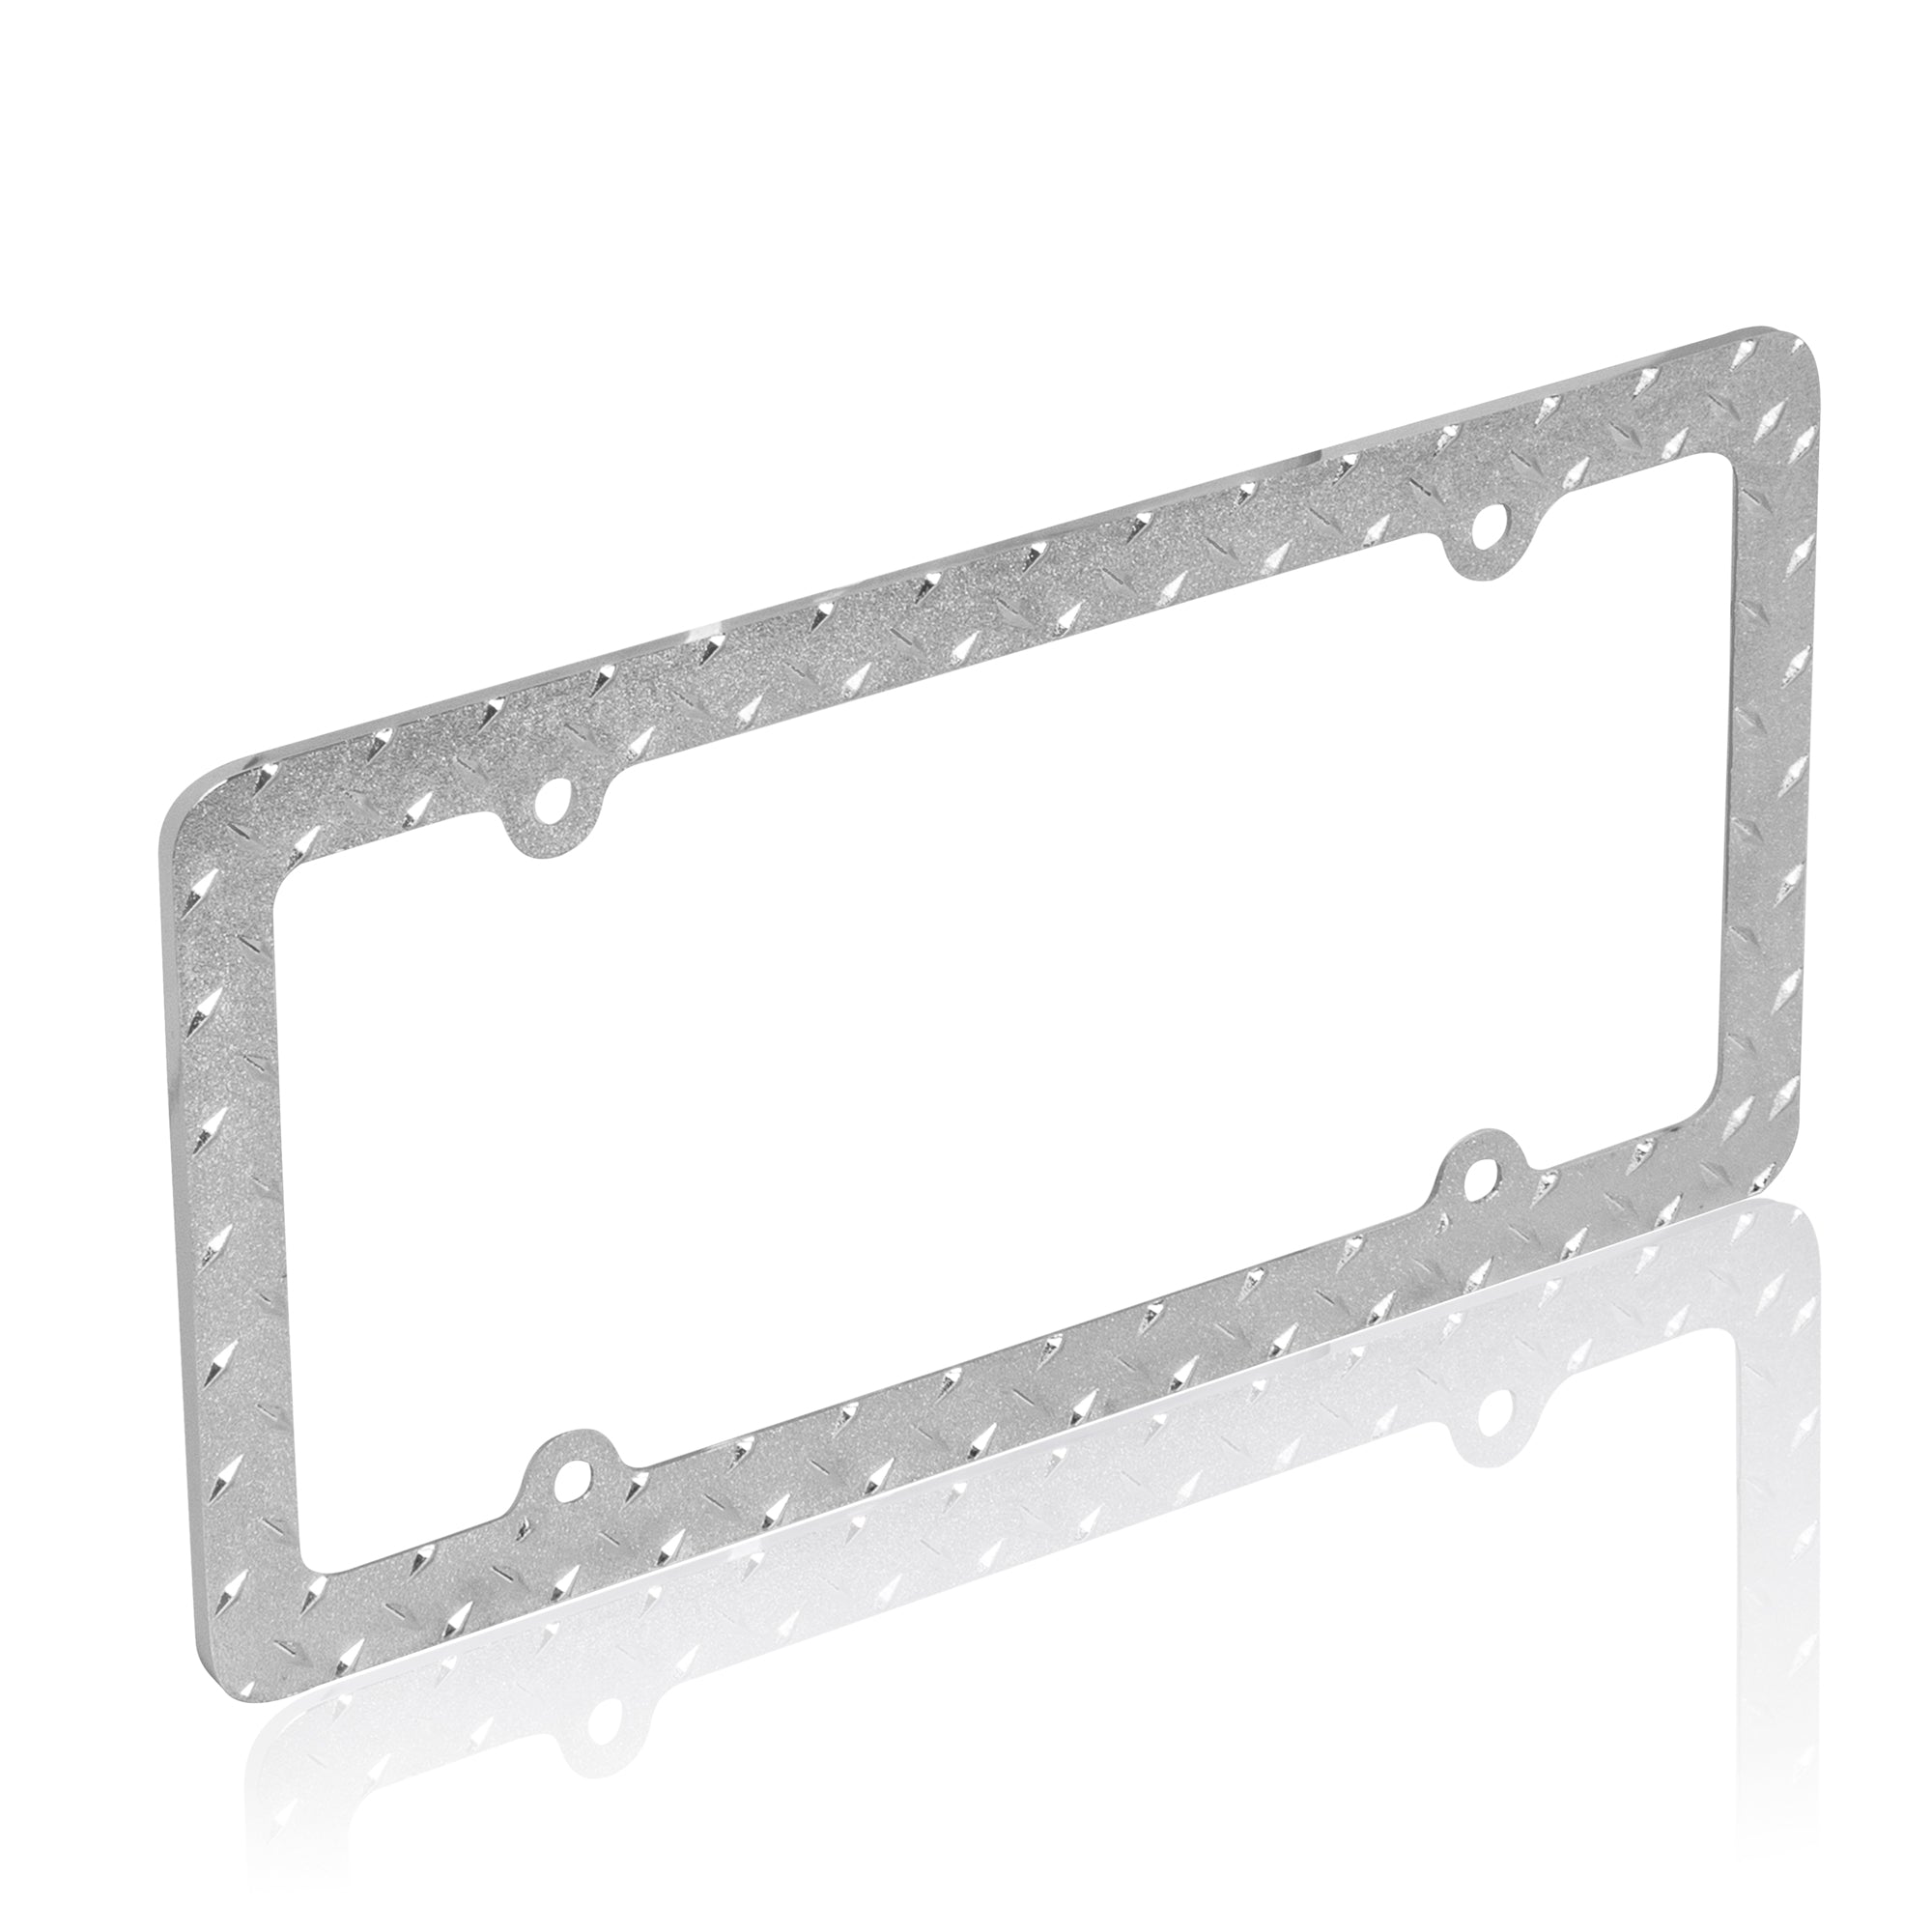 Heavy Duty Rust-Proof Chrome Plated Stainless-Steel Metal Diamond License Plate Frame Universal Size for Car Truck SUV (Pack of 2)